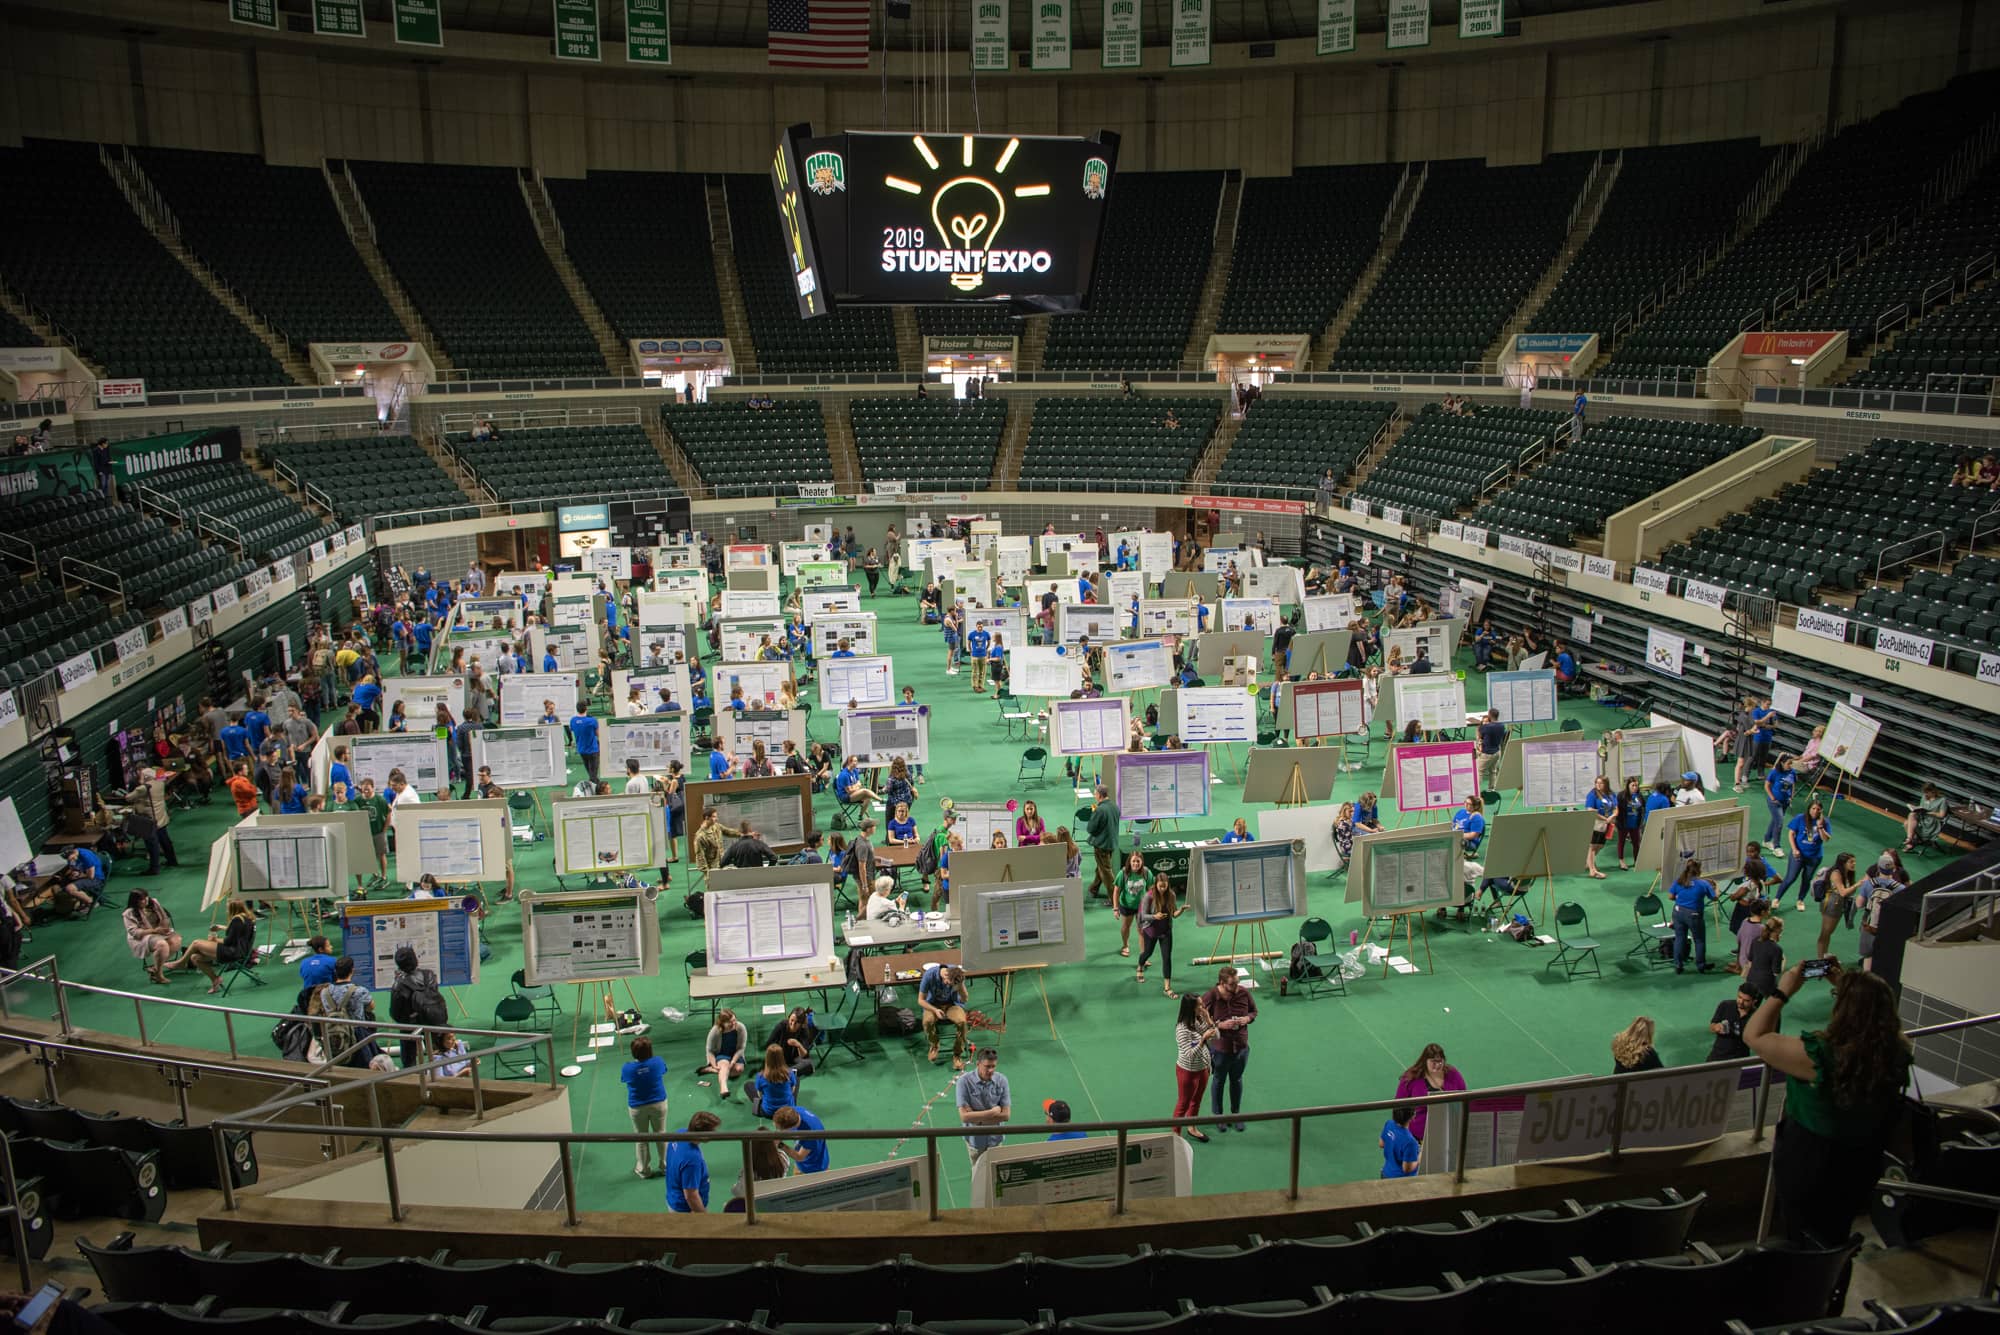 More than 800 students participate in the annual Student Research and Creative Activity Expo. It includes presenters from dozens of academic disciplines.